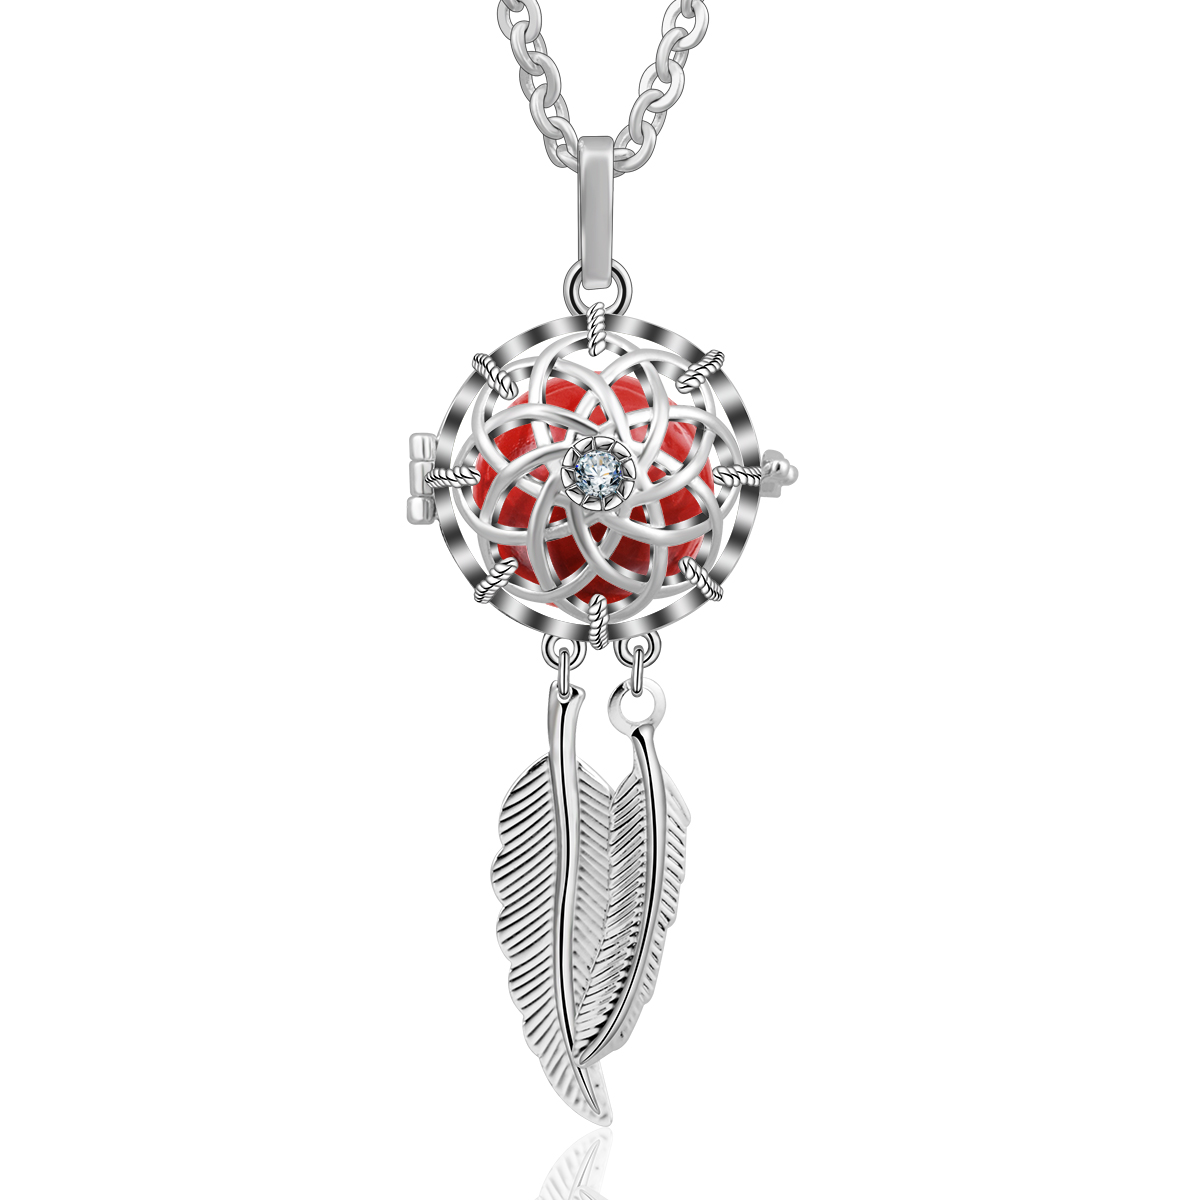 Merryshine Jewelry New Wholesale Special Silver Round Cage Pendant Fashion Jewelry CZ Locket with Leafs